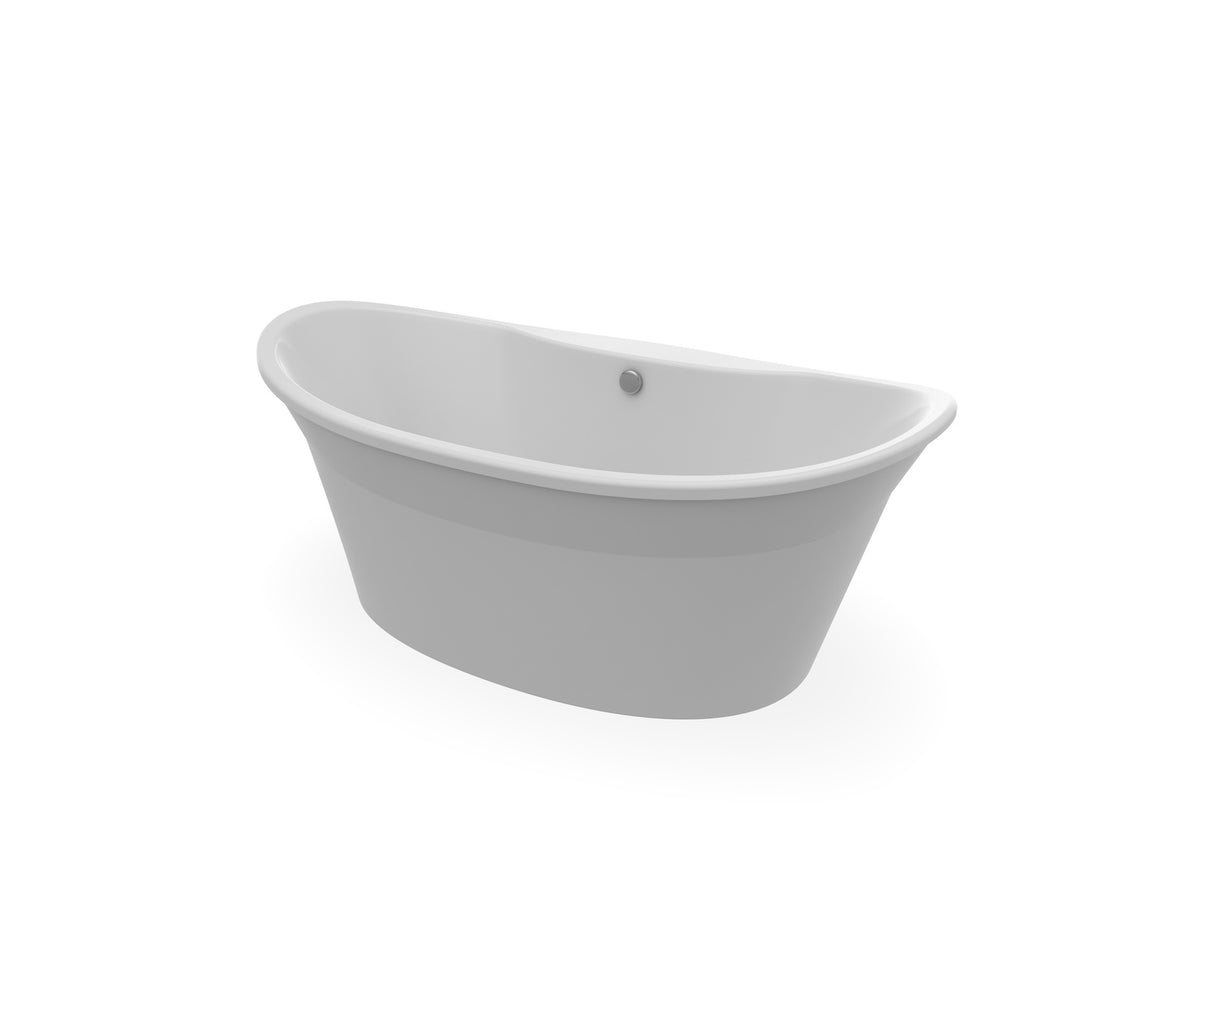 MAAX 106151-000-002-128 Orchestra 6636 AcrylX Freestanding Center Drain Bathtub in White with Sterling Silver Skirt